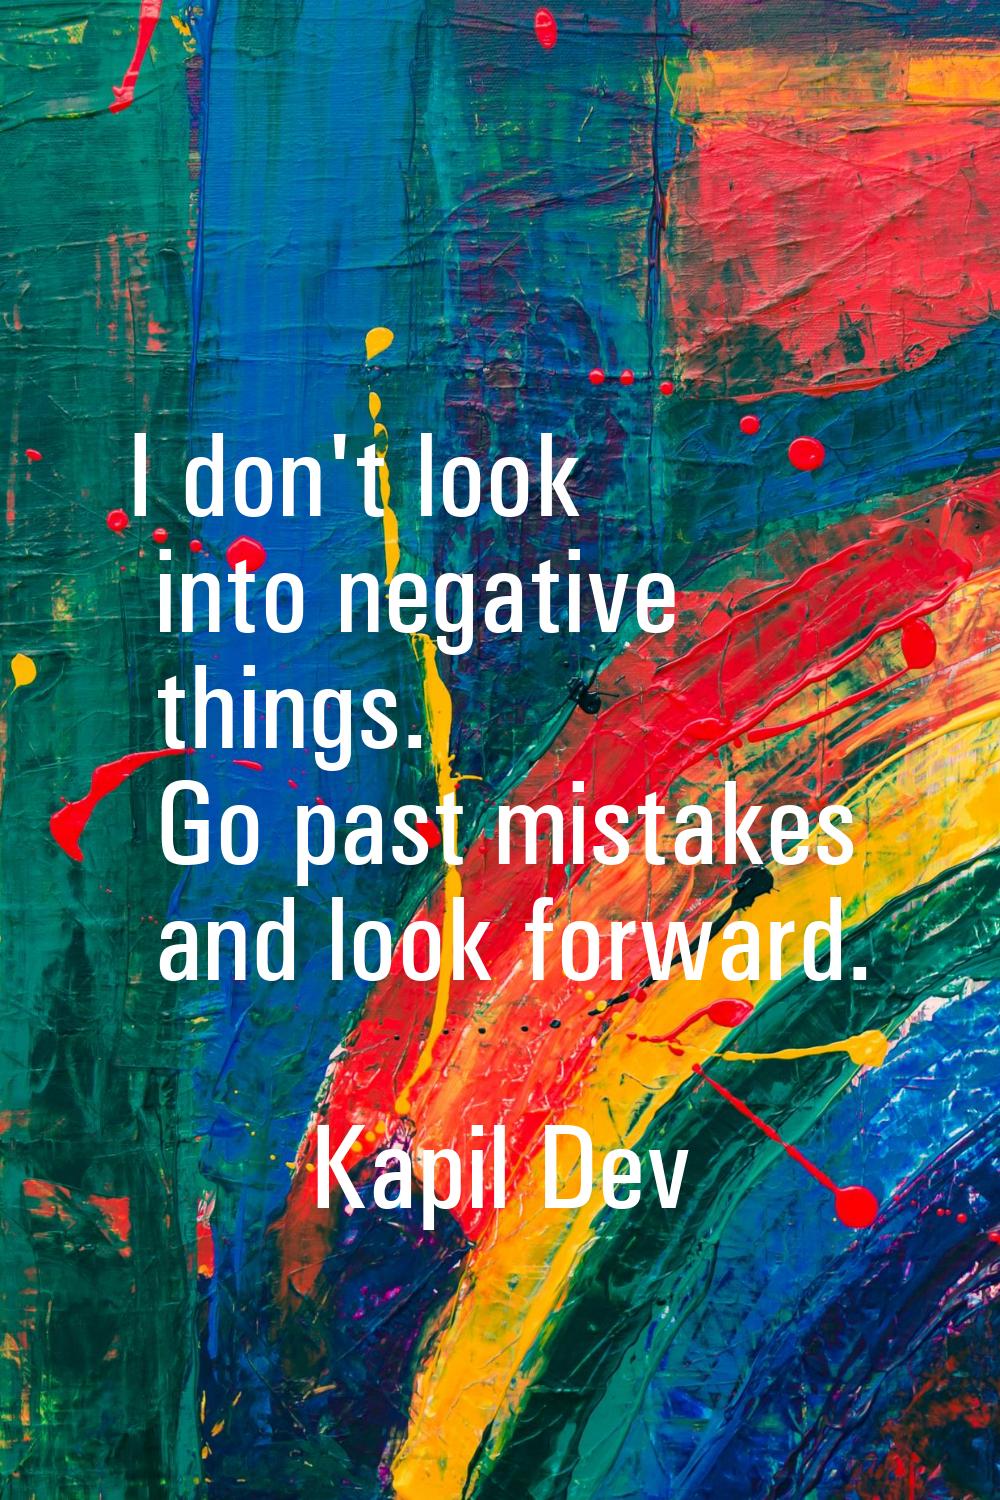 I don't look into negative things. Go past mistakes and look forward.